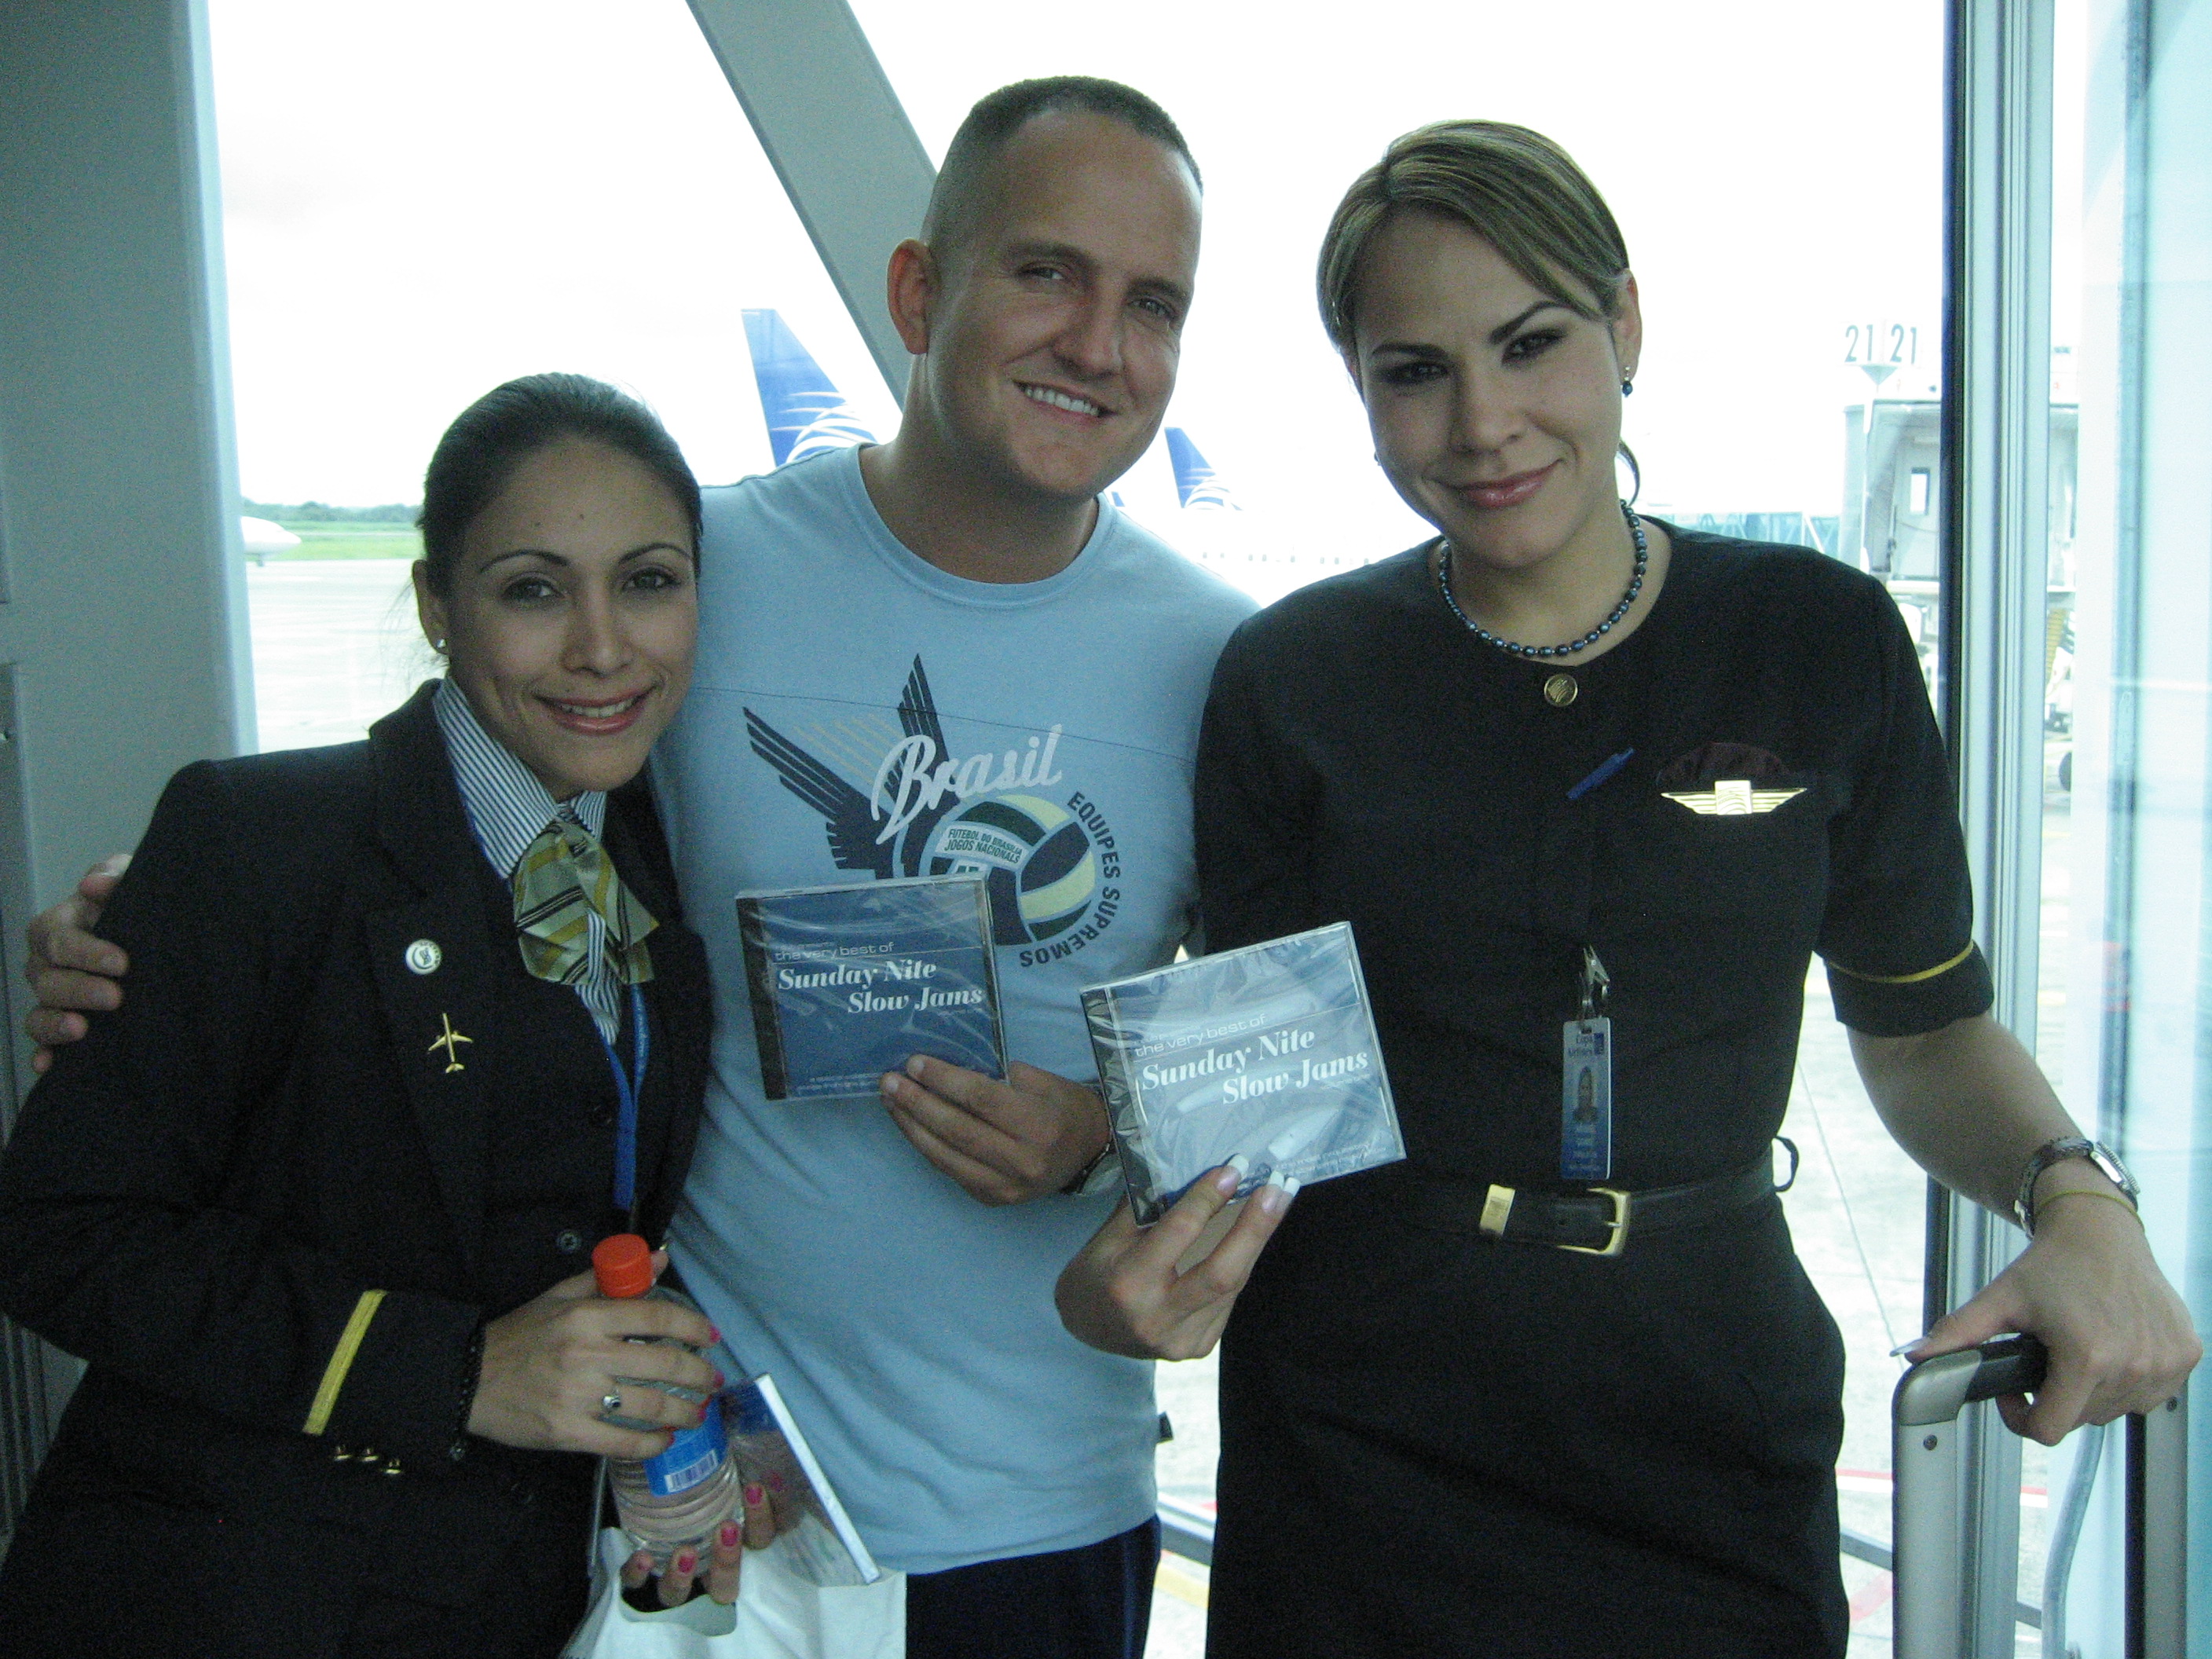 The lovely flight attendants of Copa Airlines - Panama